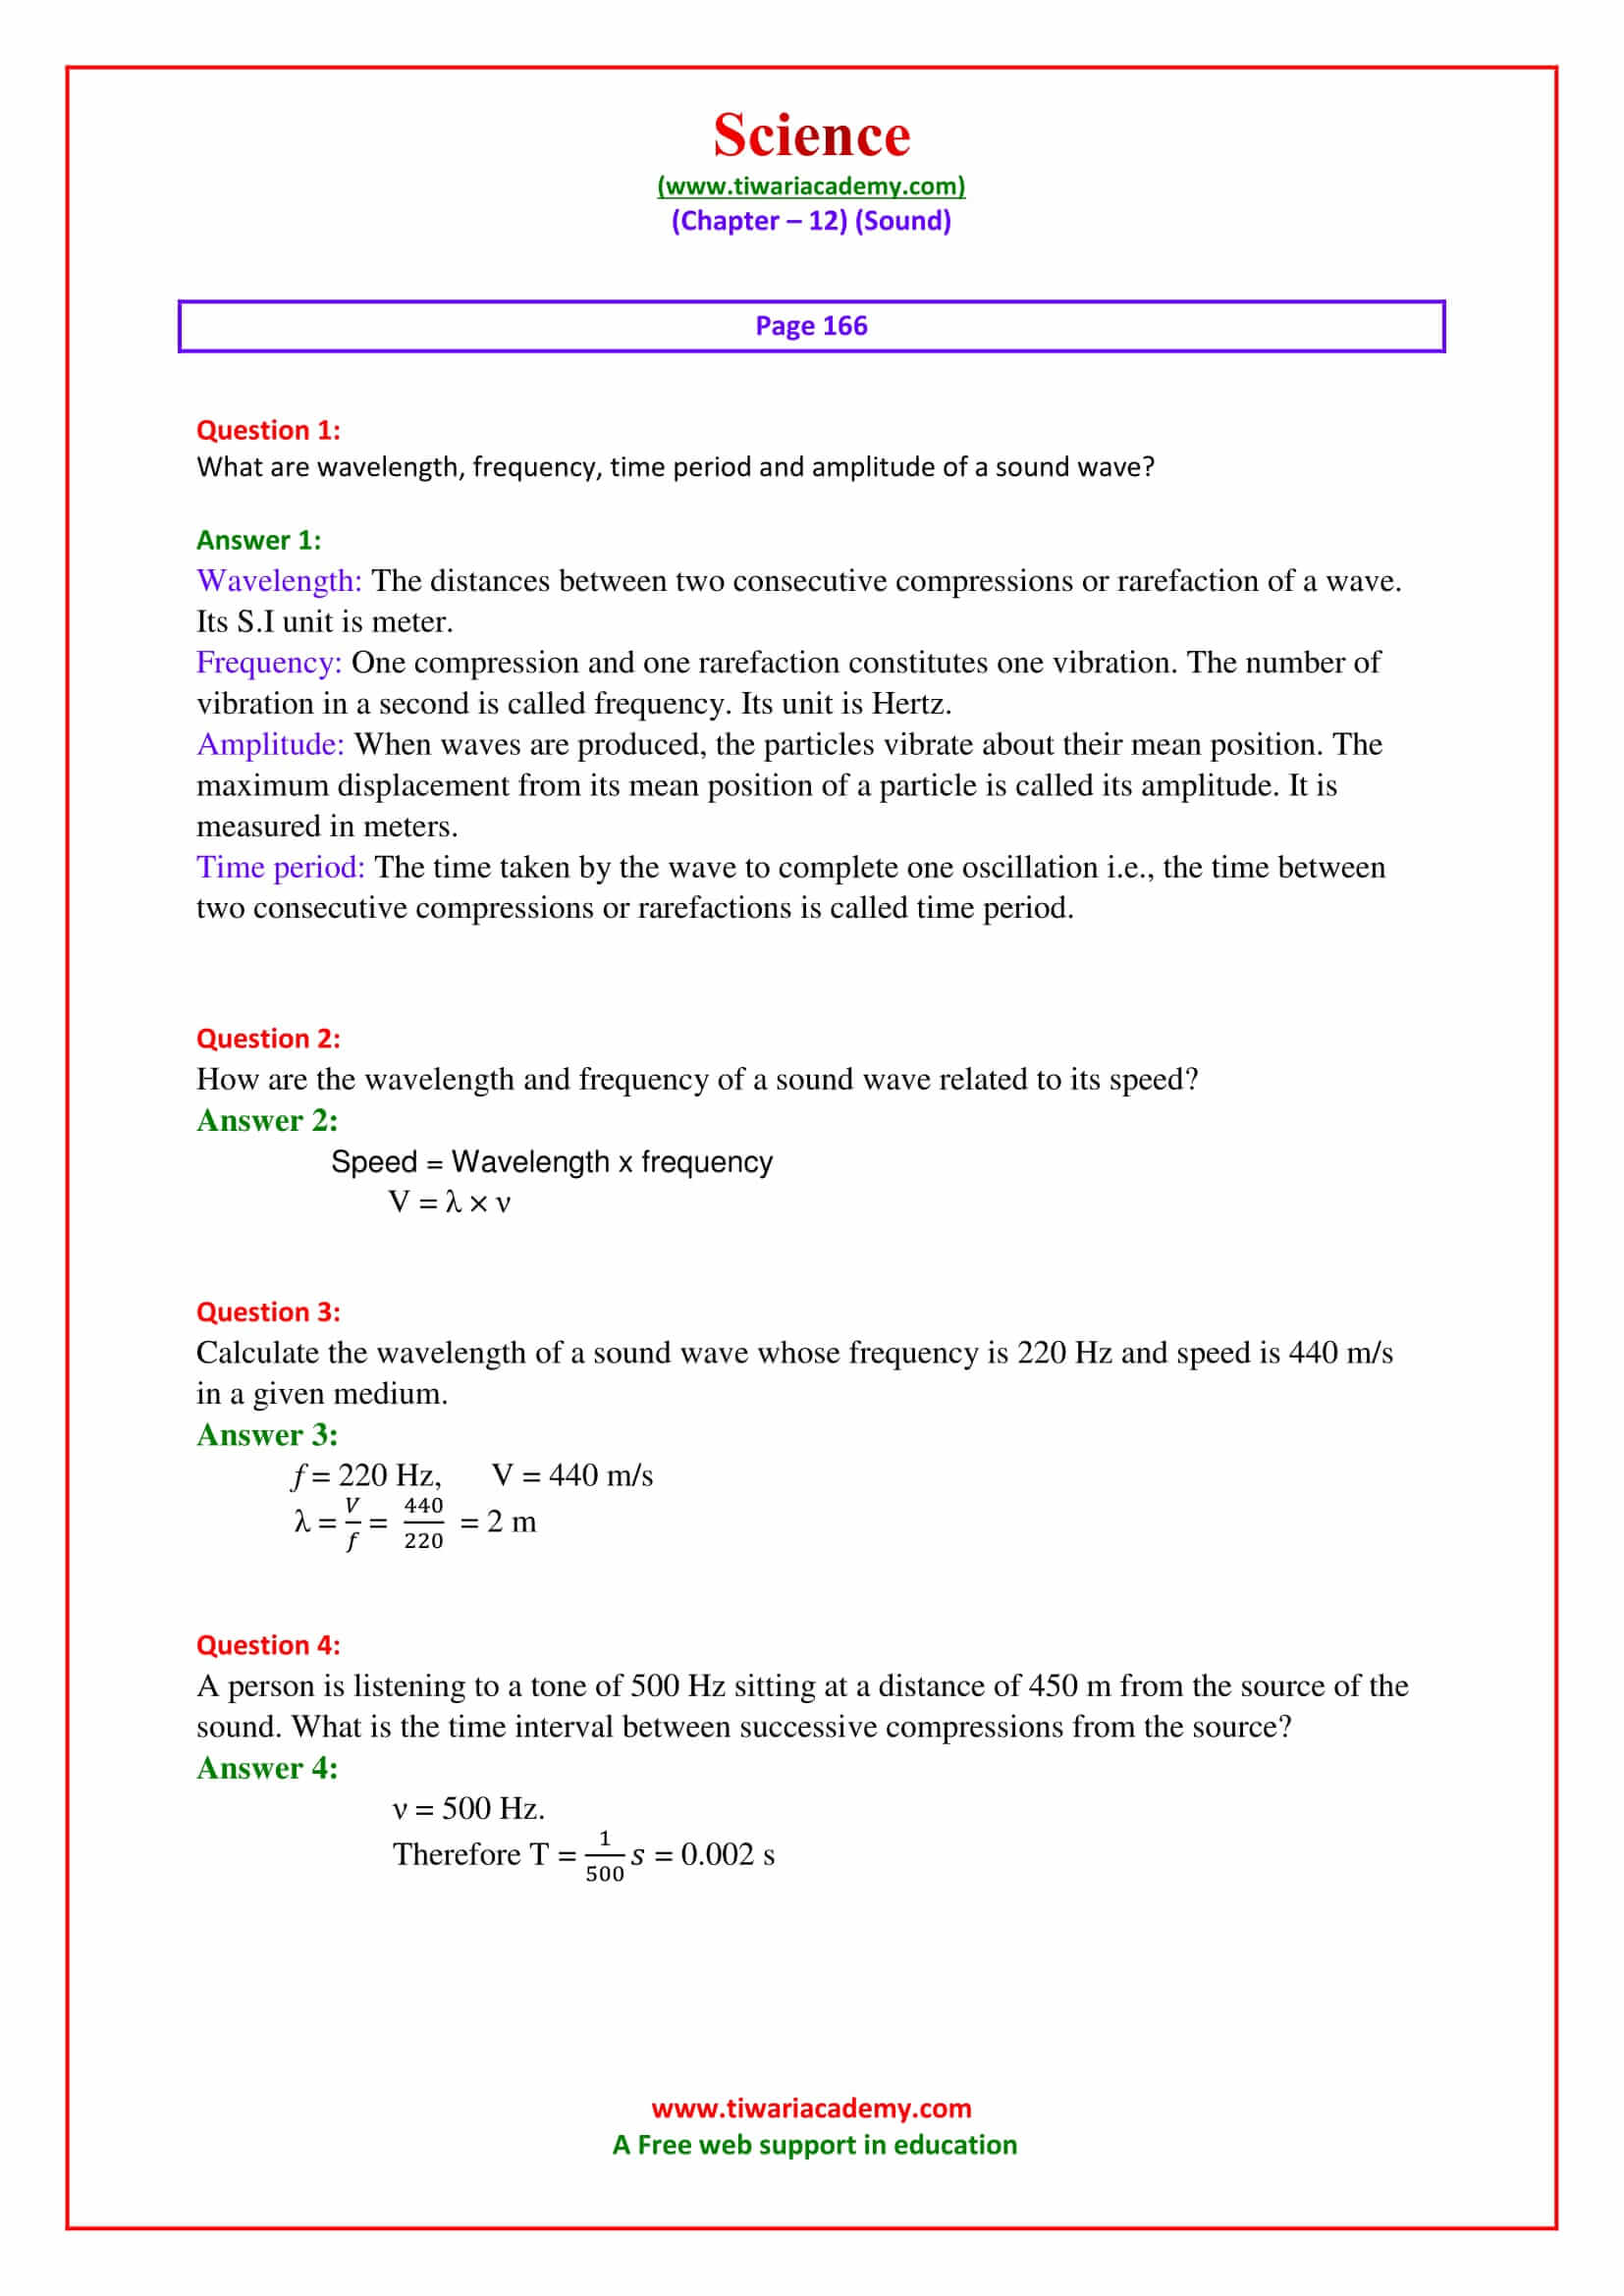 NCERT Solutions for Class 9 Science Chapter 12 Sound page 166 in pdf form